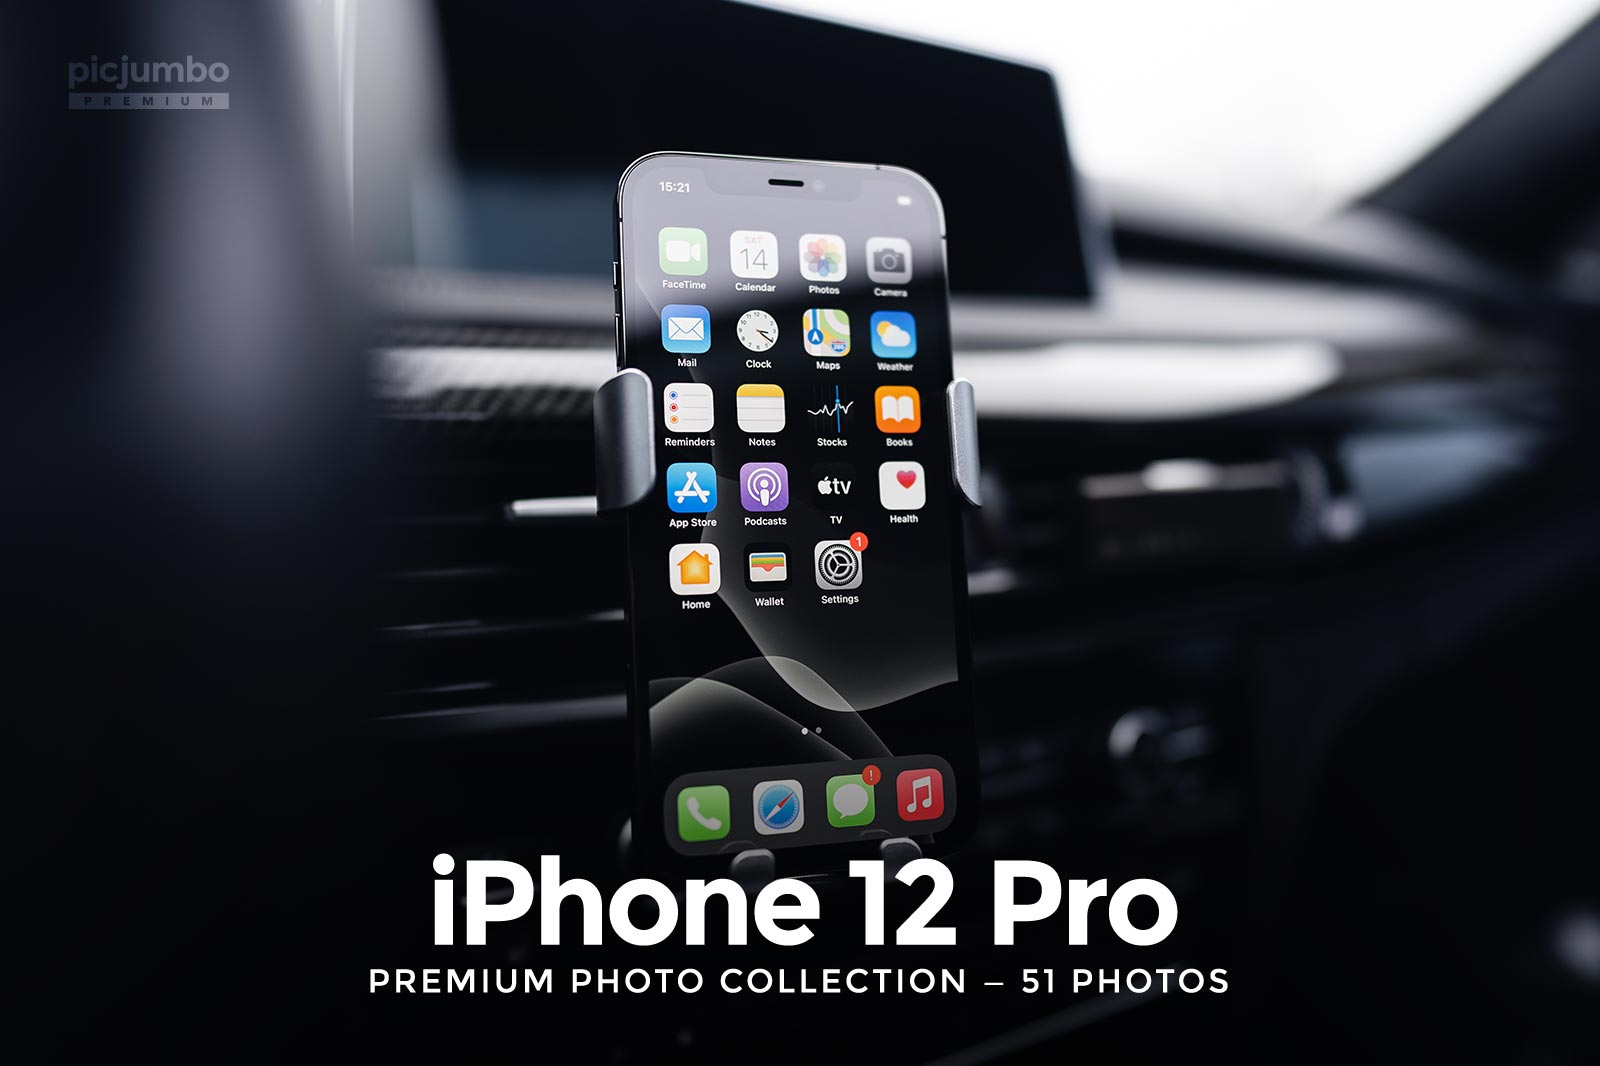 Download hi-res stock photos from our iPhone 12 Pro PREMIUM Collection!